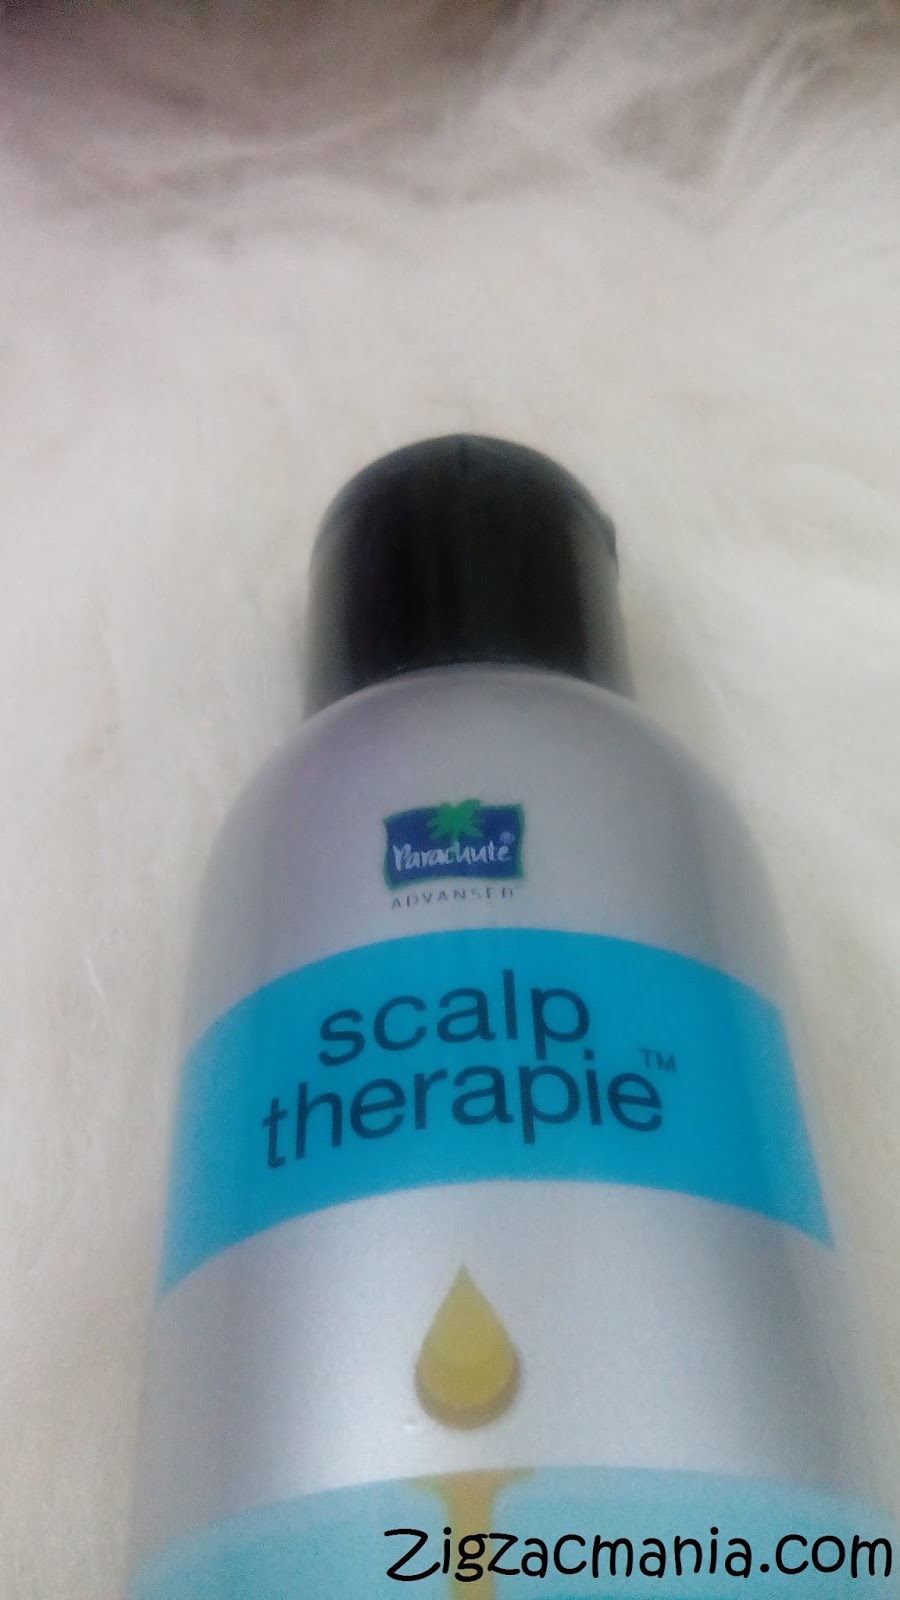 Parachute Advanced Scalp Therapy Hair Fall Control Oil Review